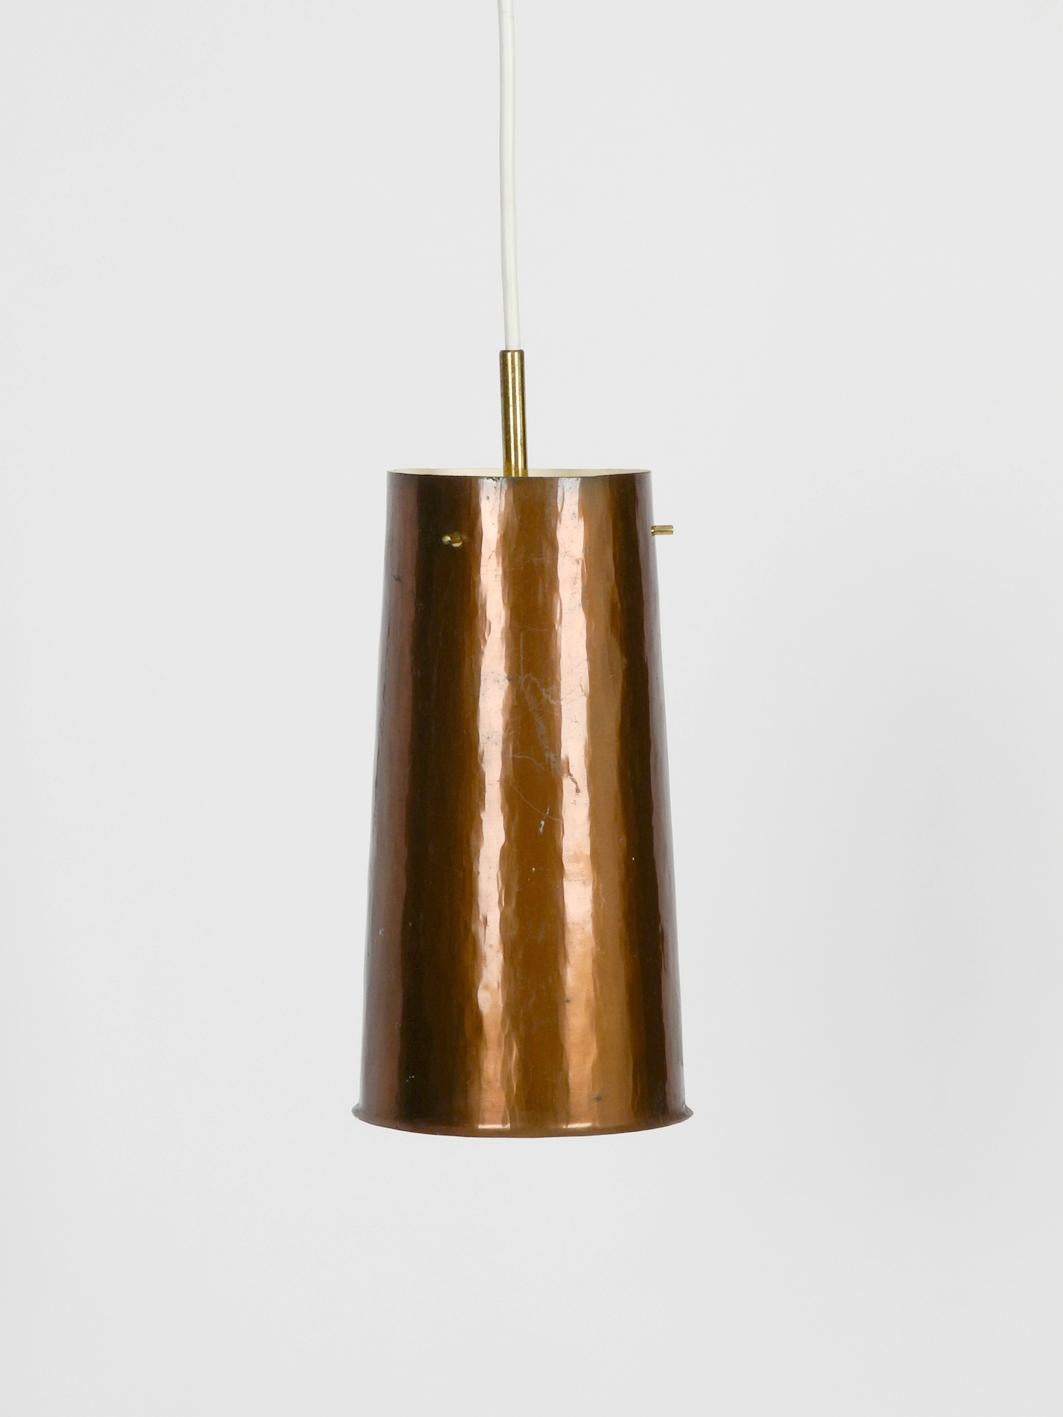 Beautiful Mid-Century Modern Pendant Lamp Made of Copper Shaped like a Cone In Good Condition For Sale In München, DE